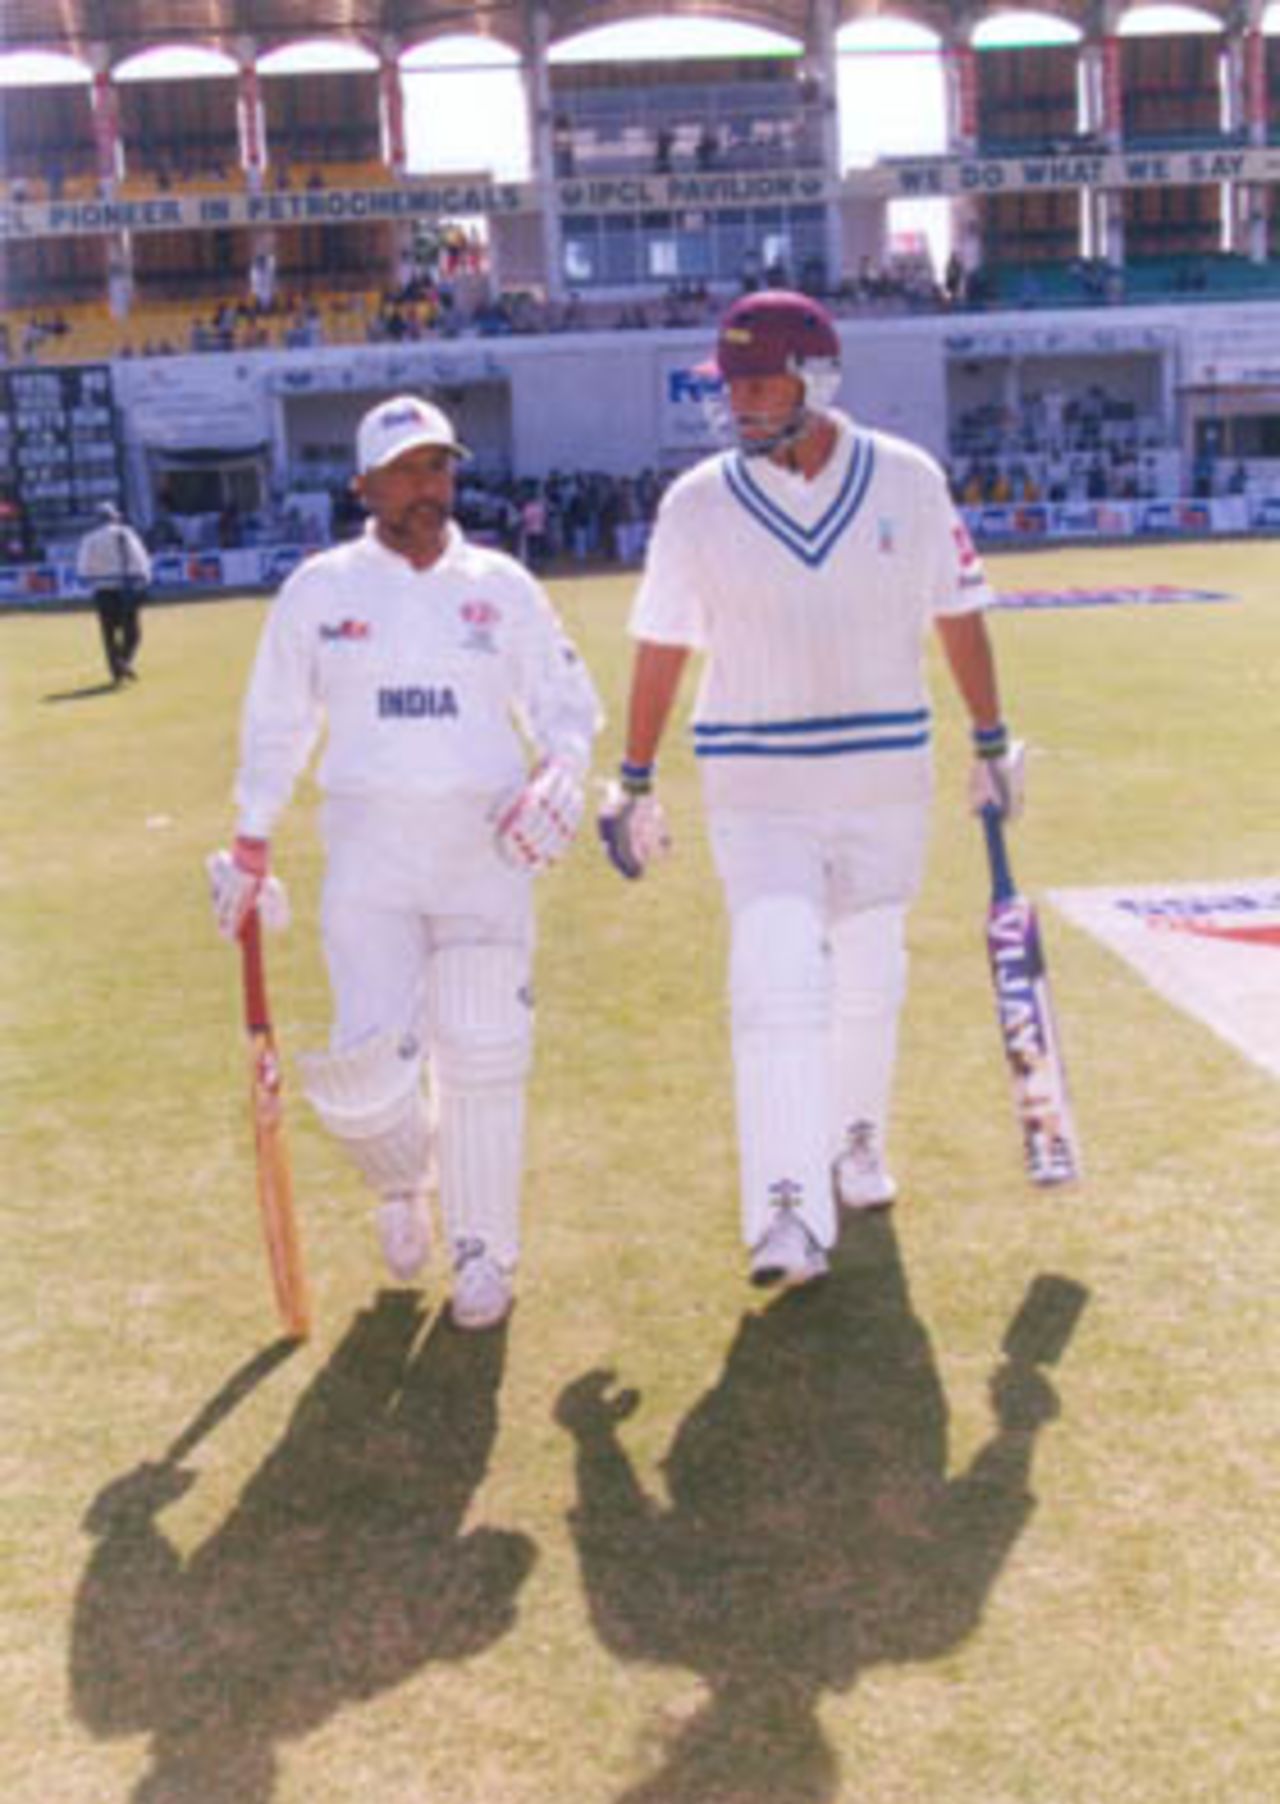 FedEx Cup 1999, Second OD: Syed Kirmani and Roger Binny coming onto the field to open the Indian innings